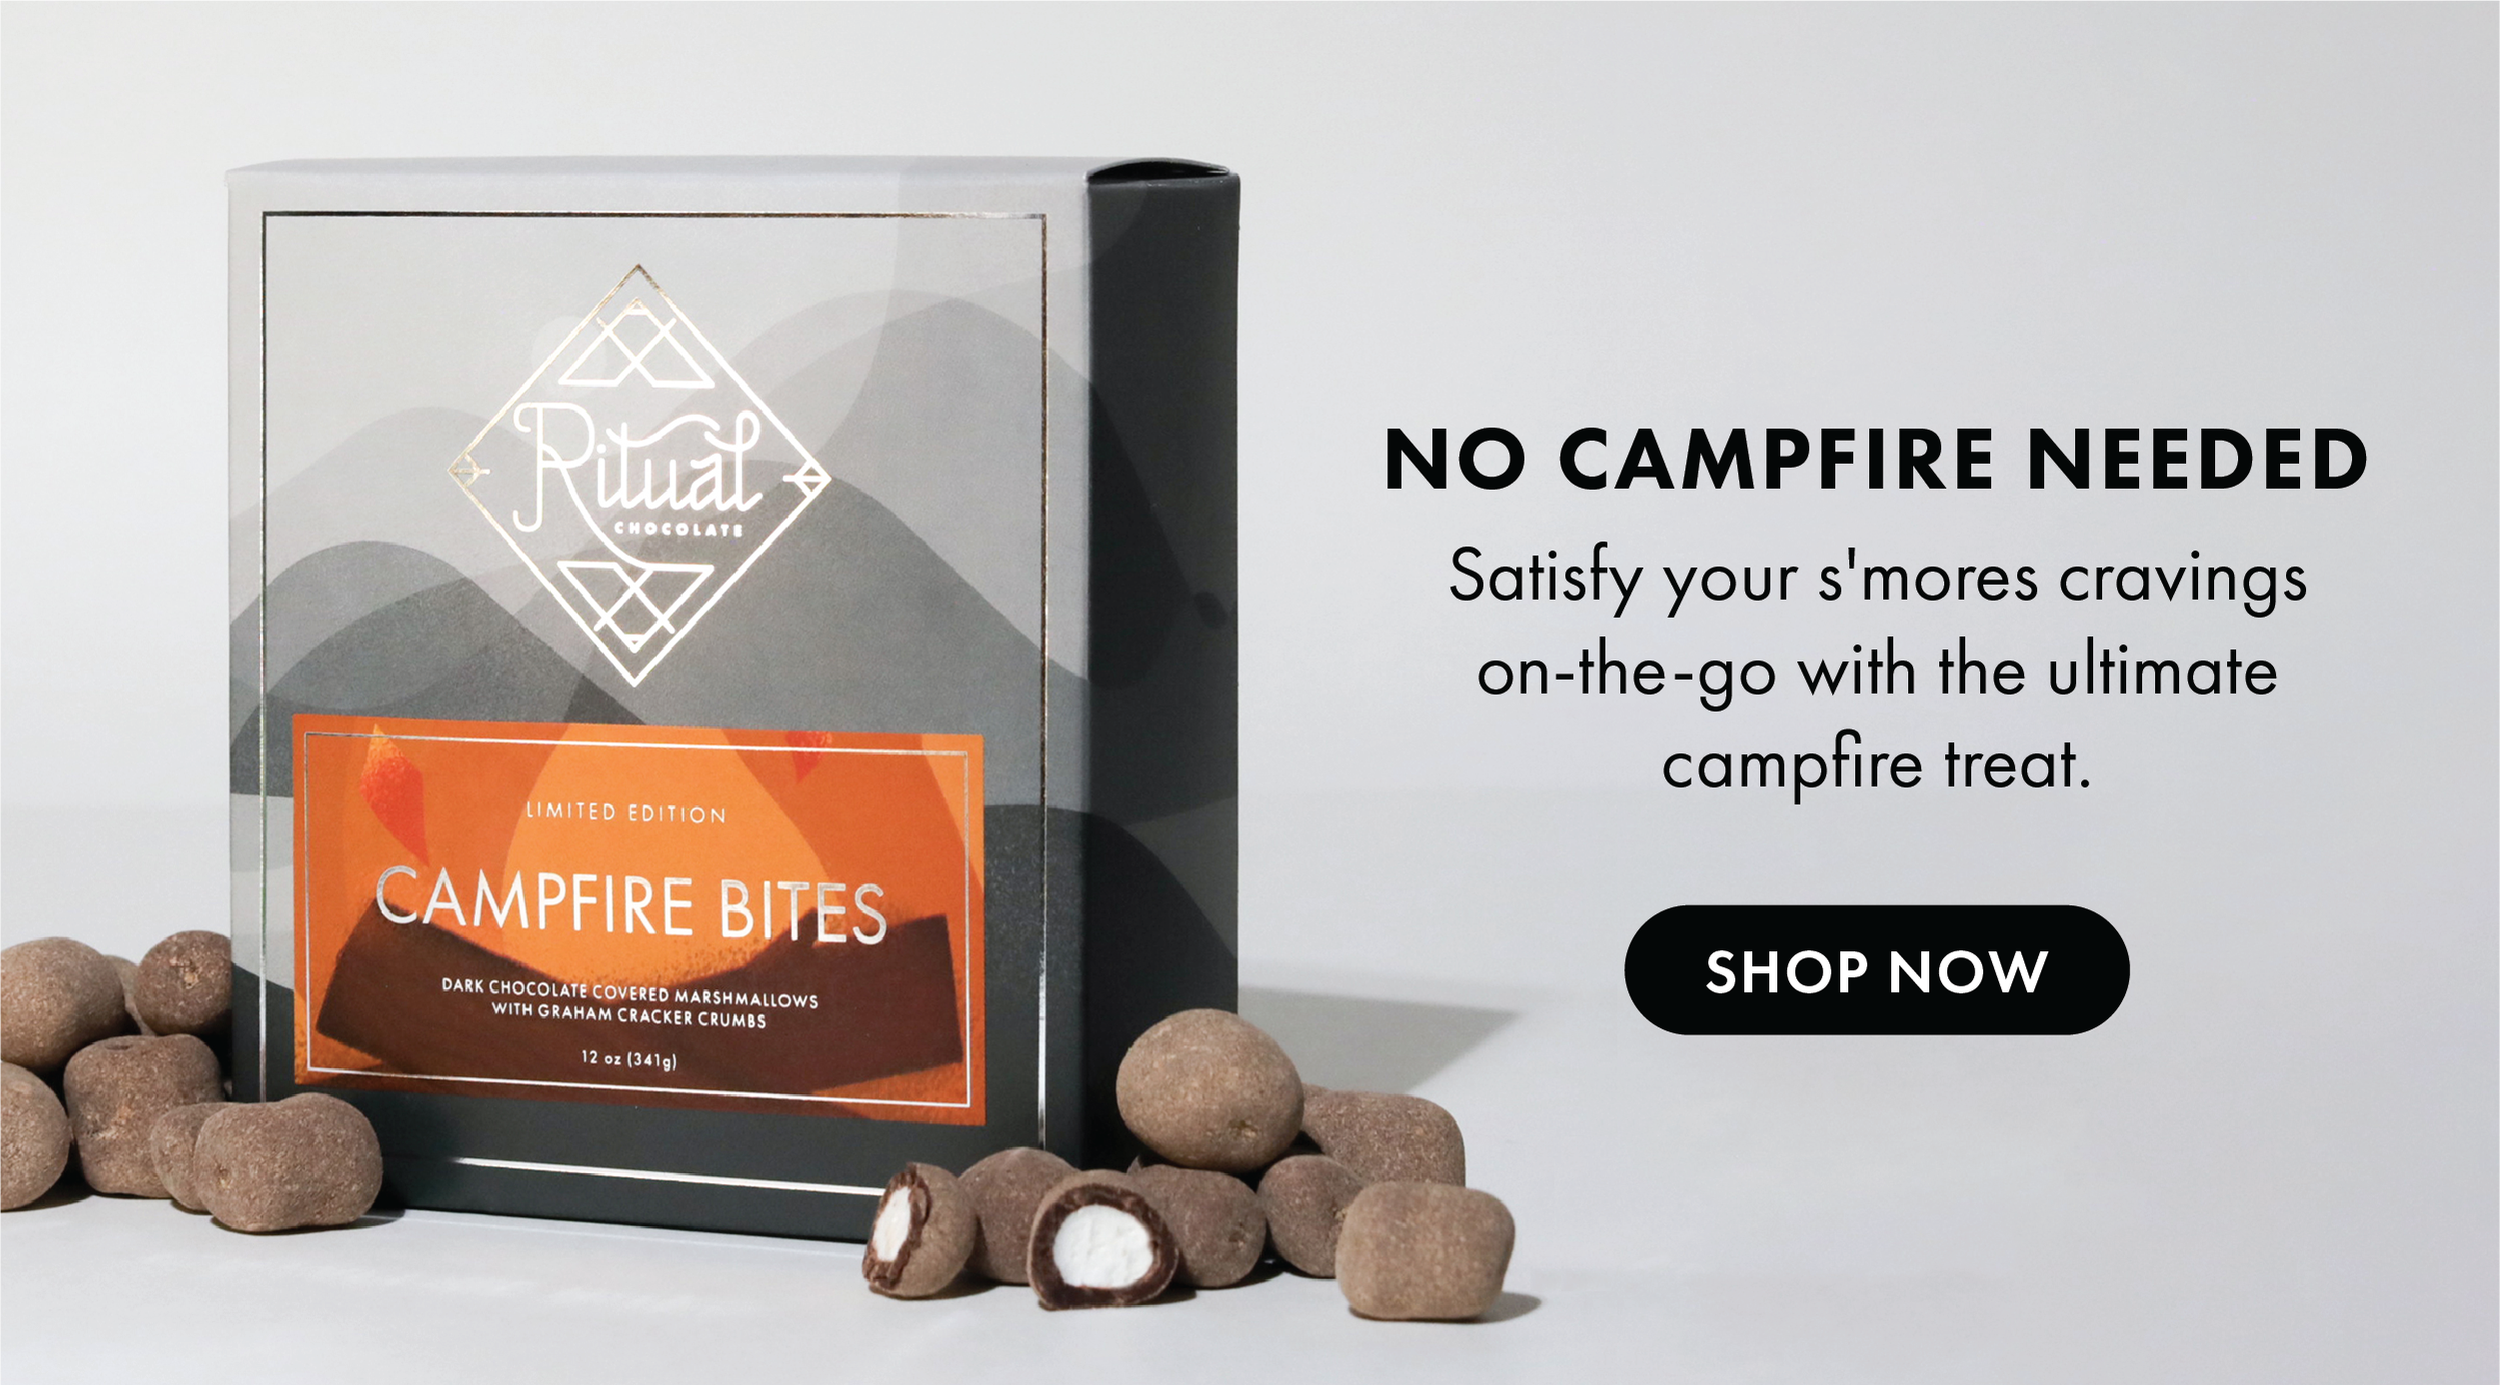 New limited edition campfire bites. No campfire needed. Satisfy your s'mores cravings on-the-go with the ultimate campfire treat